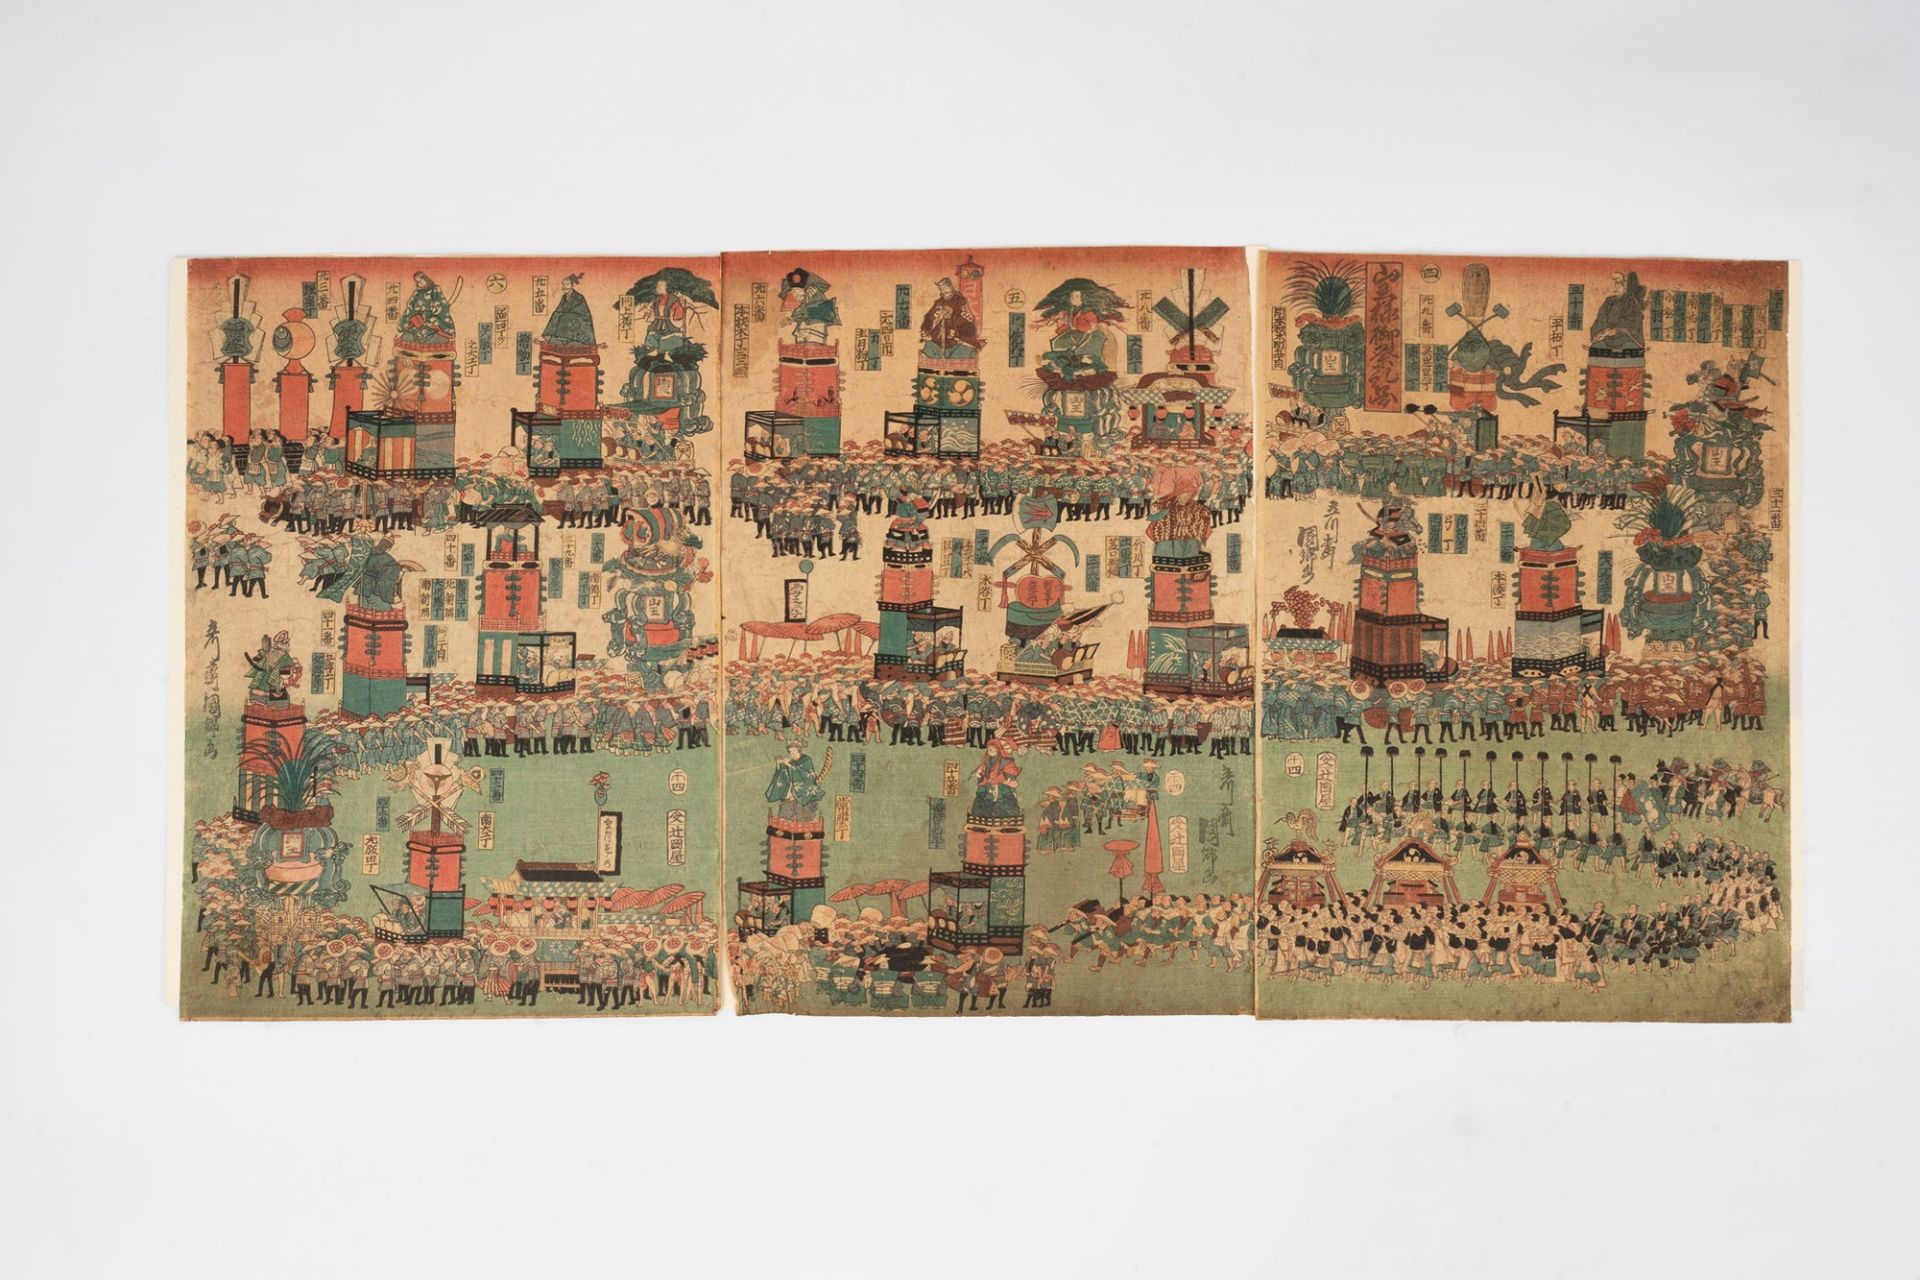 Lot composed of a triptych of woodcuts depicting a ceremony, Japan, Edo period